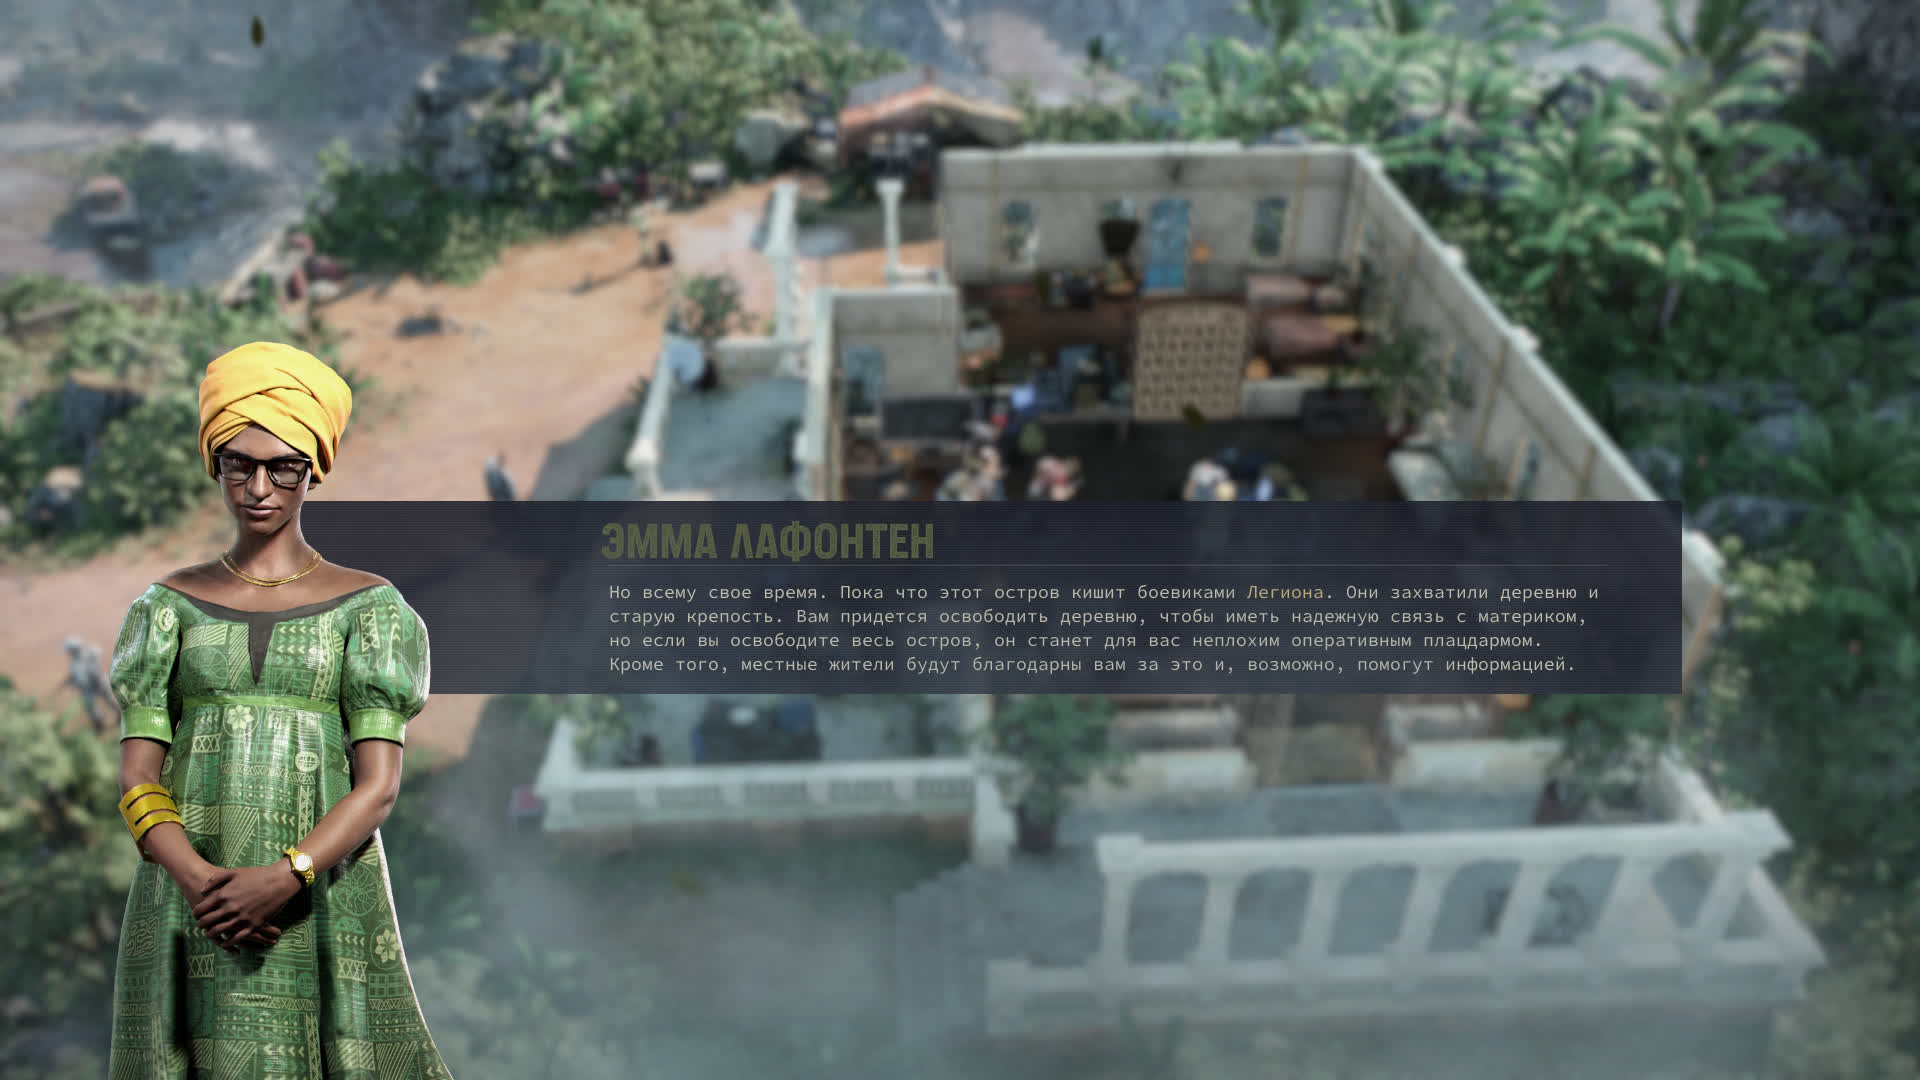 Jagged Alliance 3 Review